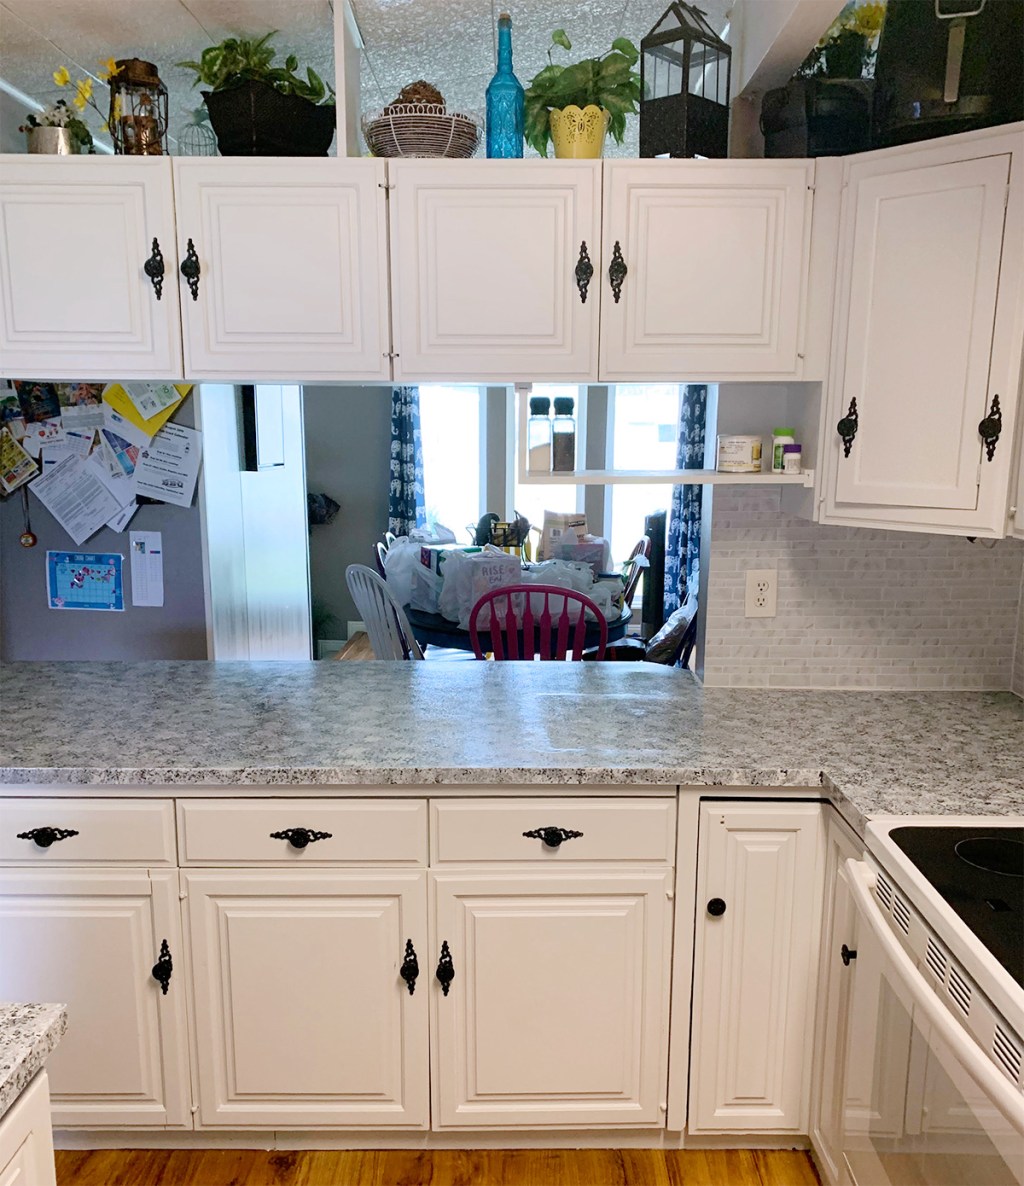 ktichen transformation after with white cabinets and refinished countertop